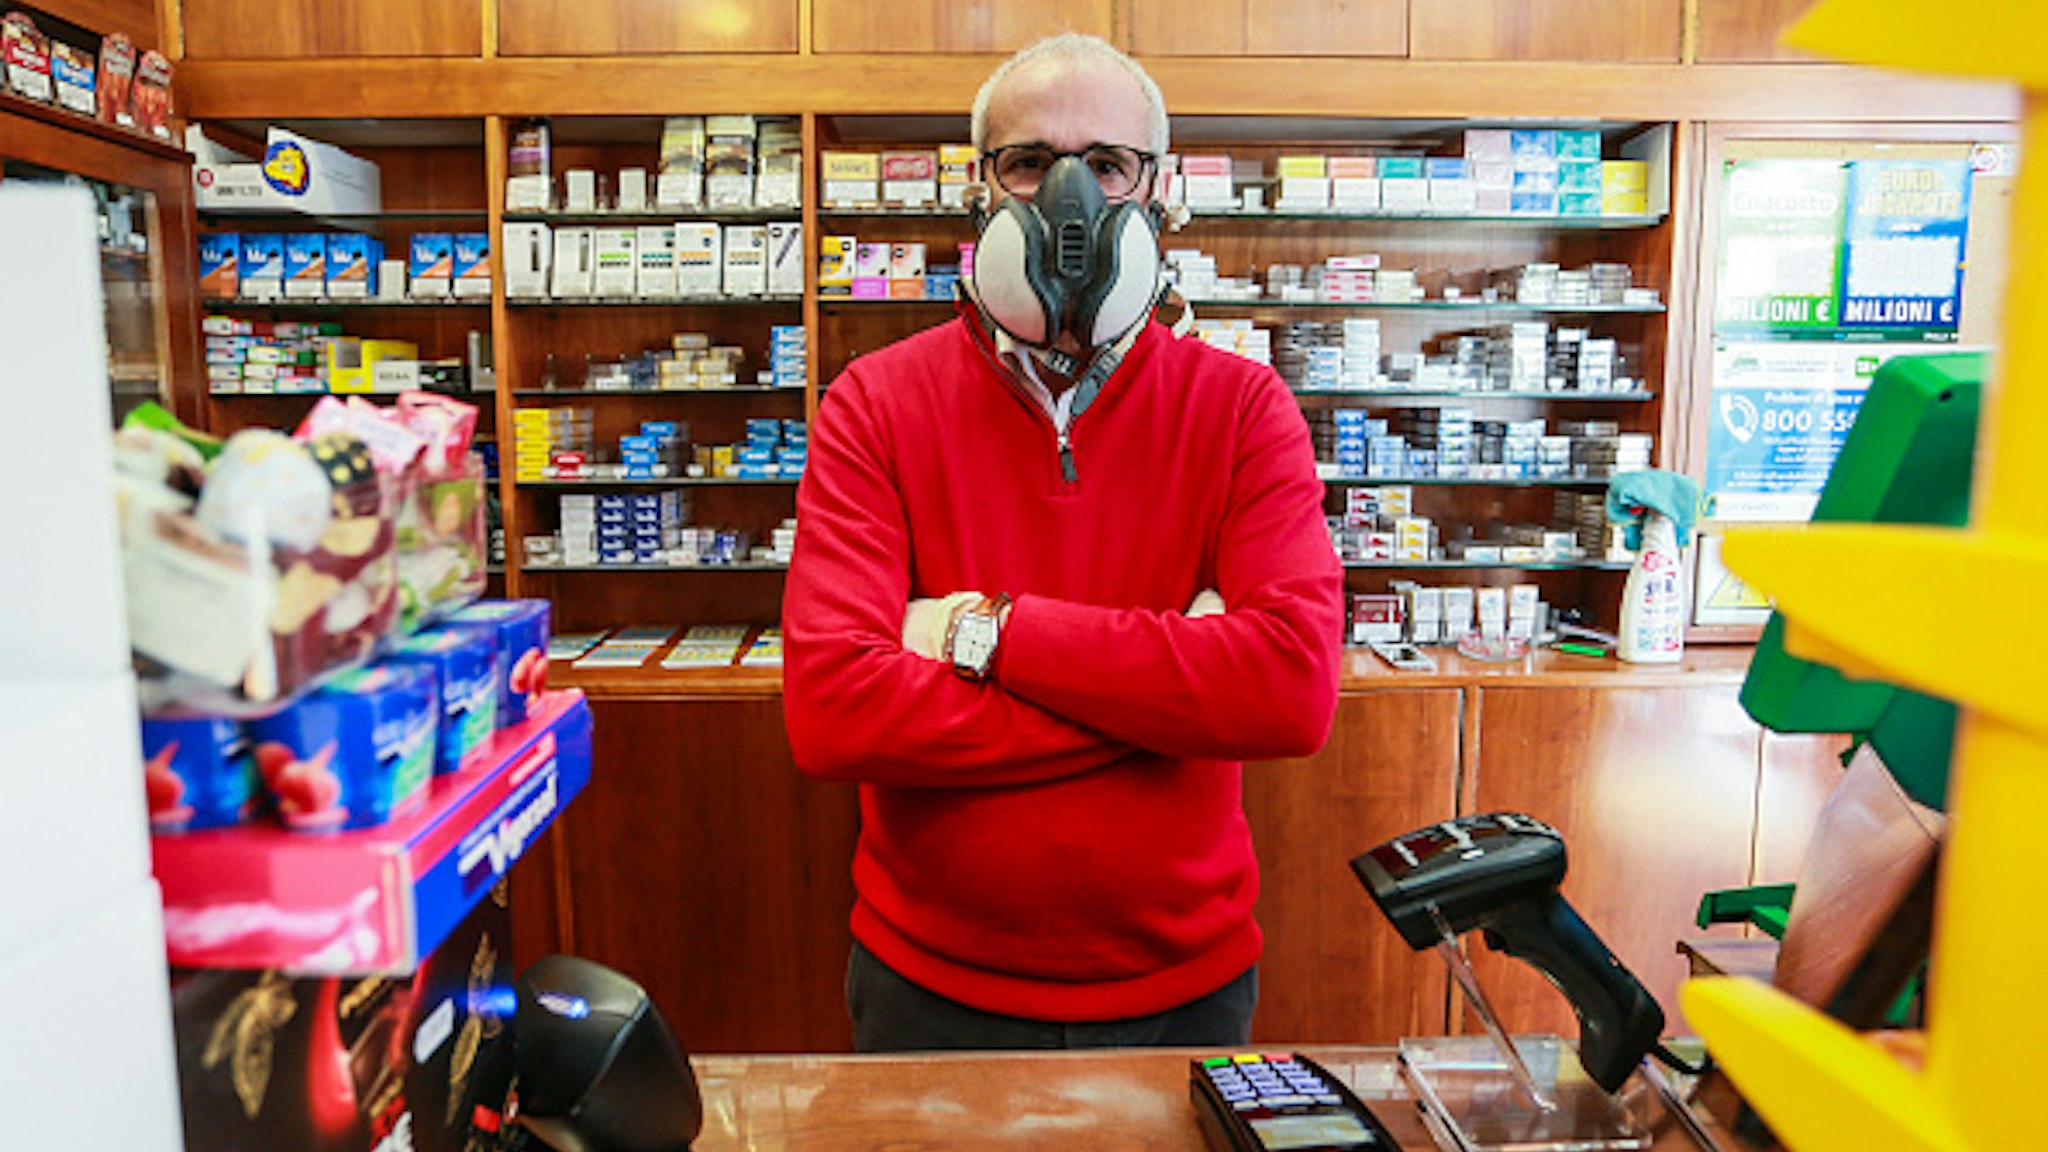 ROME, ITALY - MARCH 16: A tobacconist keeps working during the Coronavirus (COVID-19) emergency on March 16, 2020 in Rome, Italy. It's a week after the Italian Government has taken the unprecedented measure of a nationwide lockdown by closing all businesses except essential services such as pharmacies, grocery stores, hardware stores, gas stations and tobacco stores. During the Coronavirus (COVID-19) emergency.